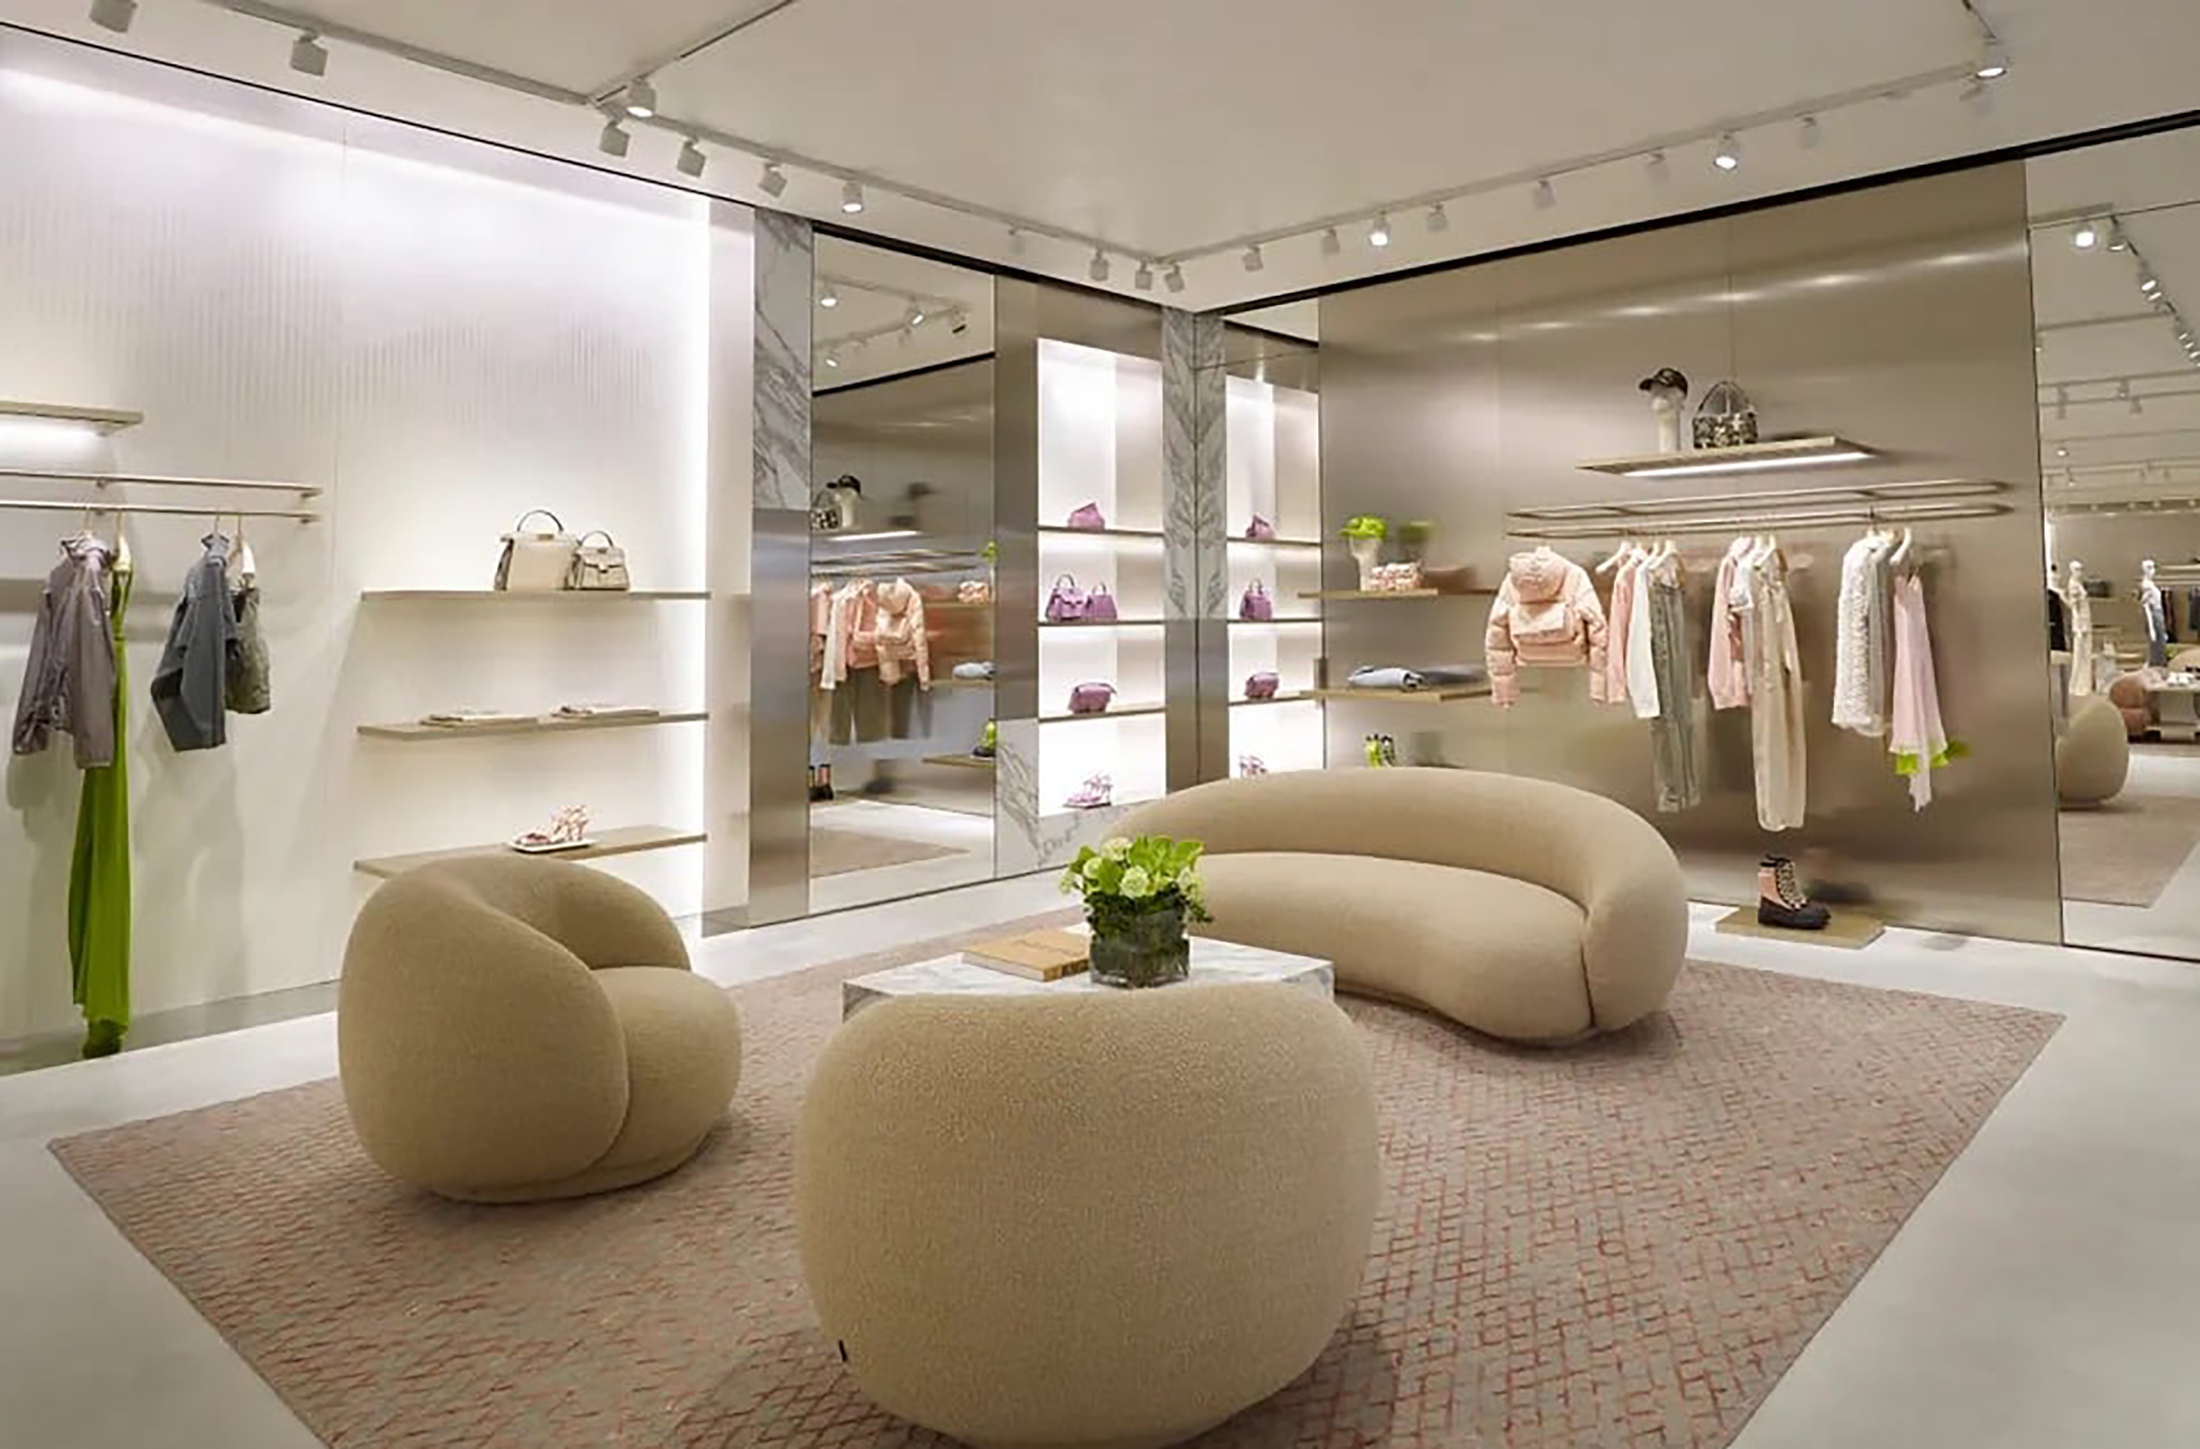 Take a look inside Fendi Casa's first flagship store